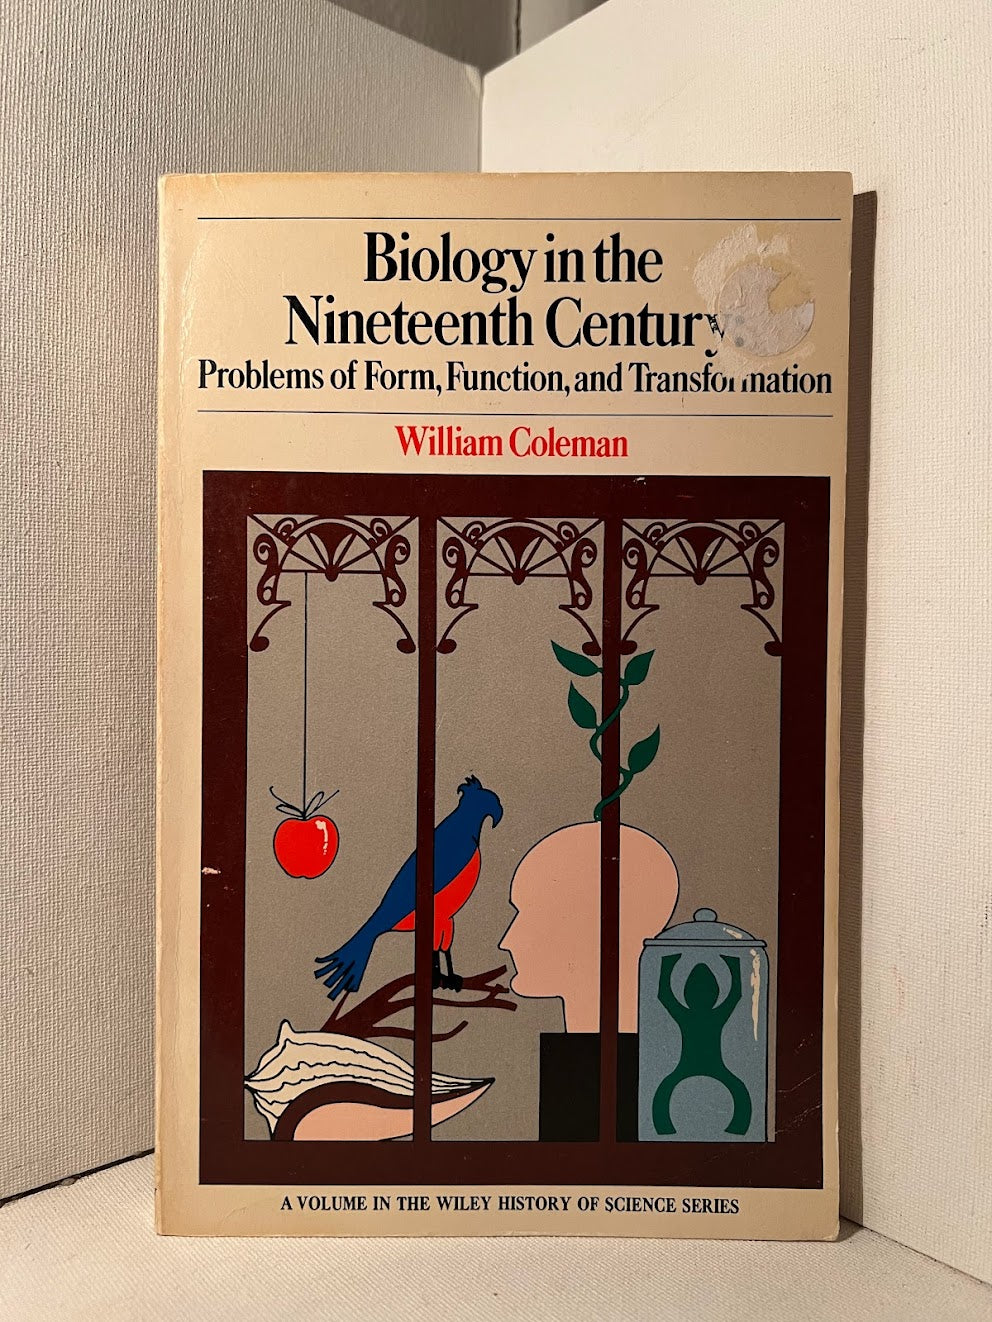 Biology in the Nineteenth Century by William Coleman